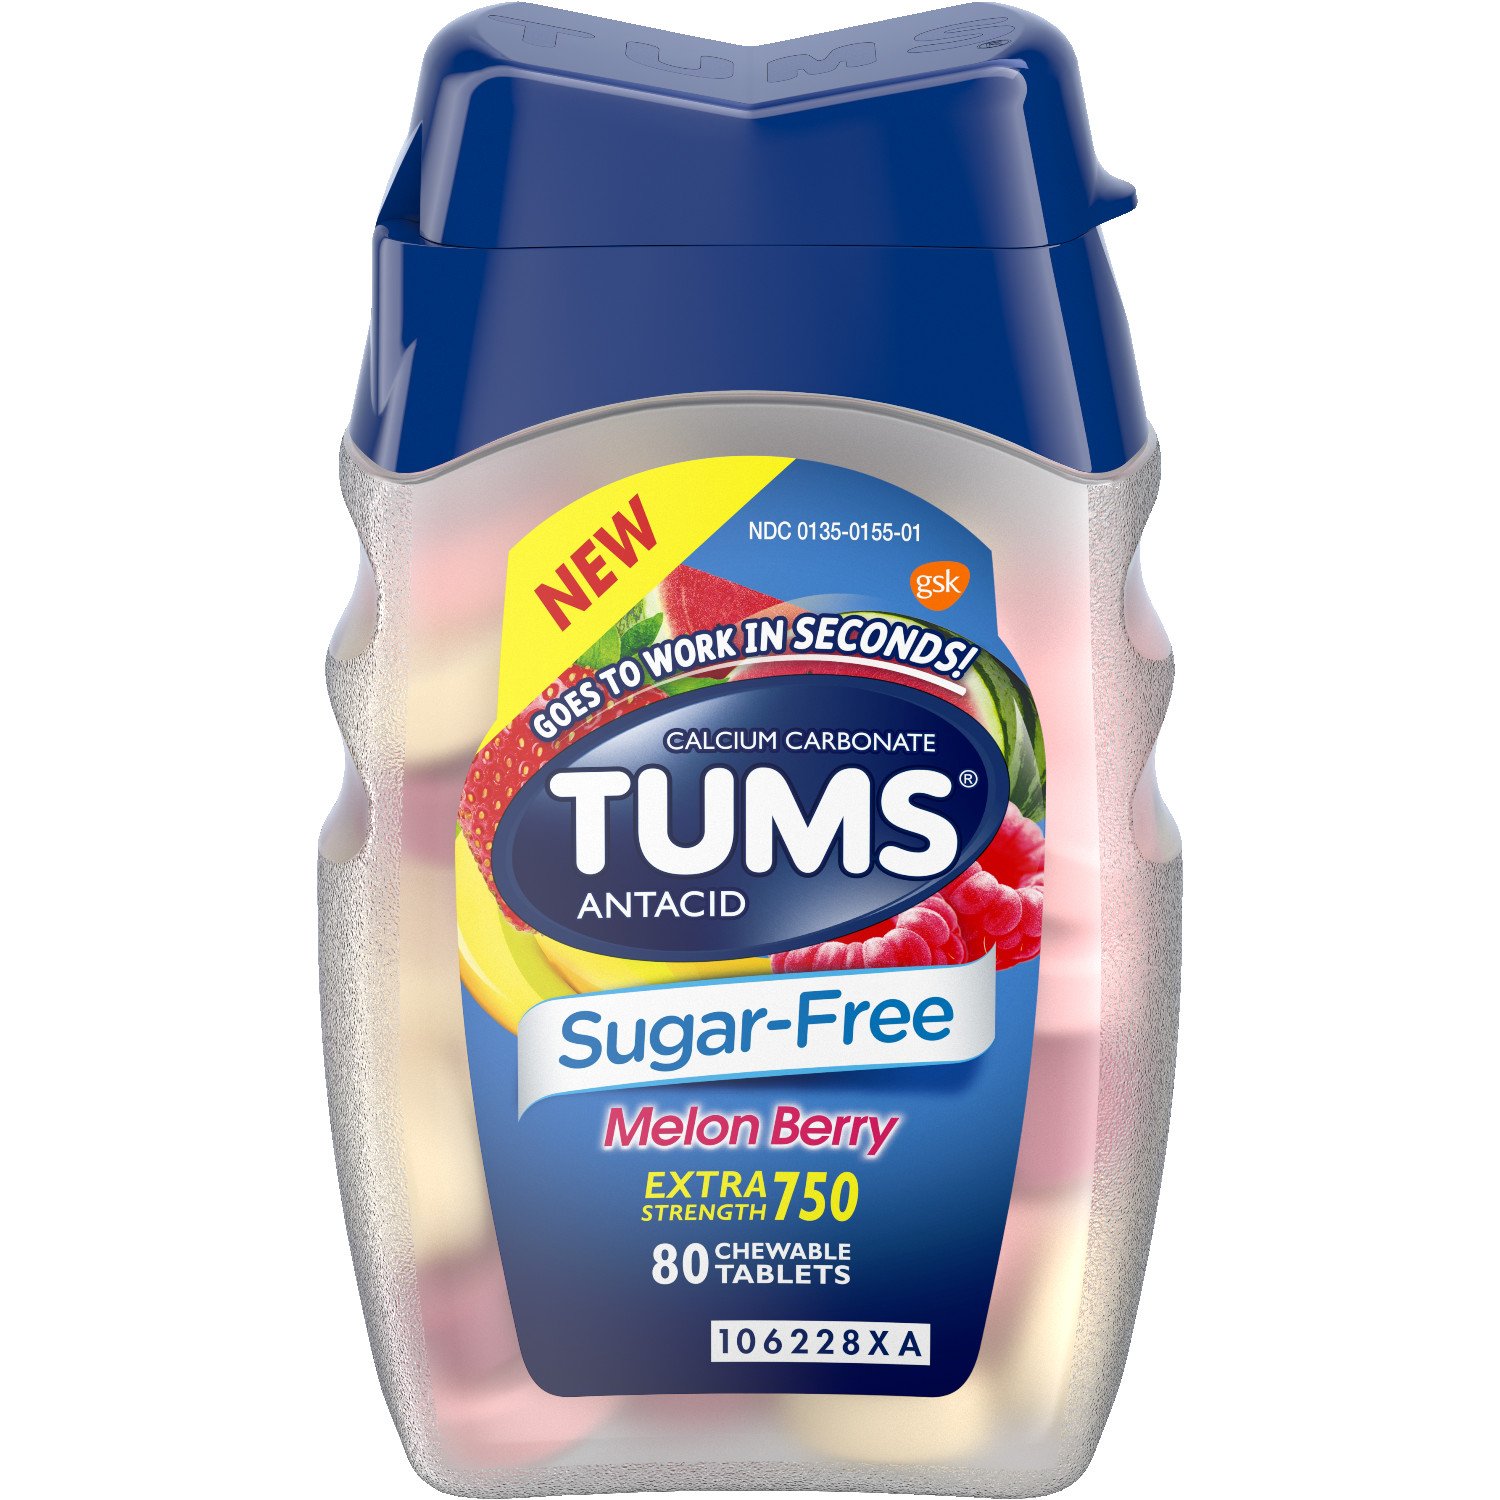 Tums Sugar-Free Antacid Melon Berry, 80 Chewable Tablets Each - image 1 of 5